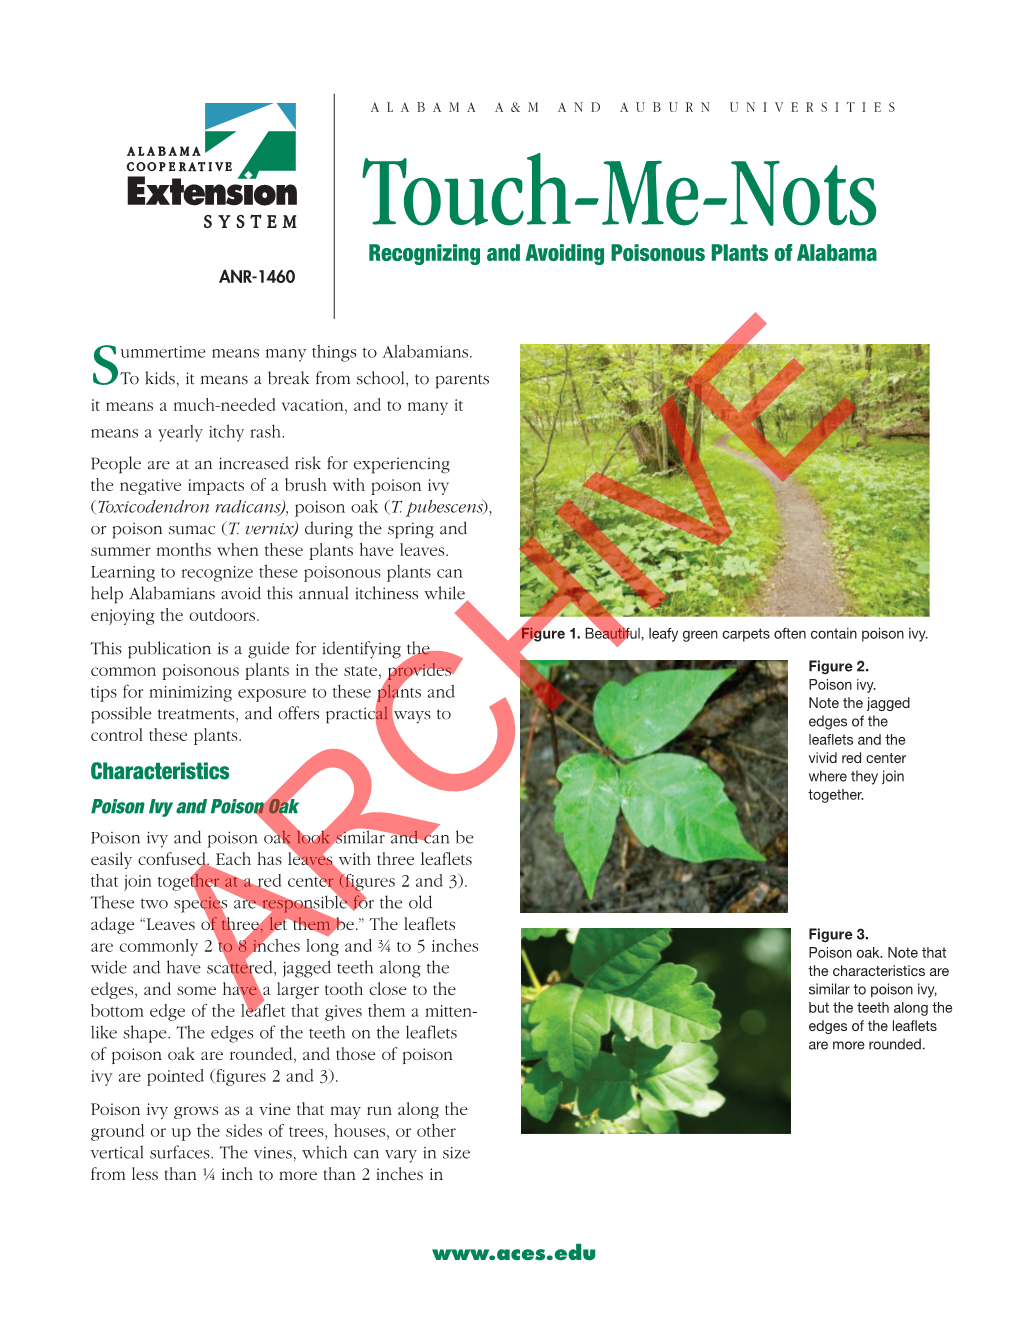 Touch-Me-Nots Recognizing and Avoiding Poisonous Plants of Alabama ANR-1460